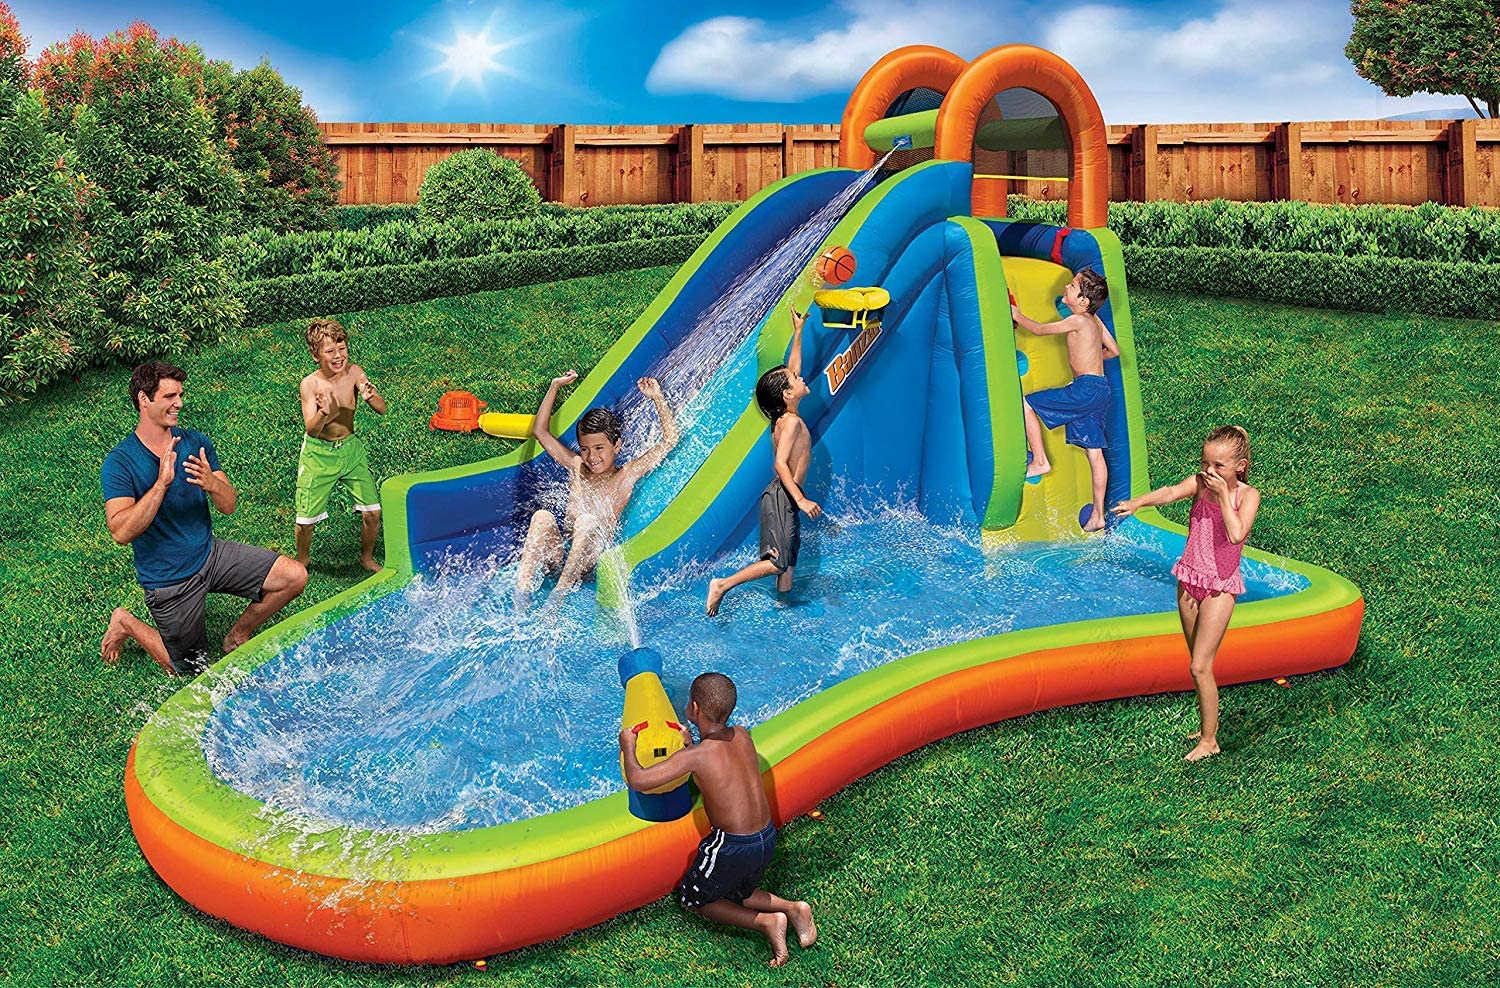 Best Inflatable Water Slide Options